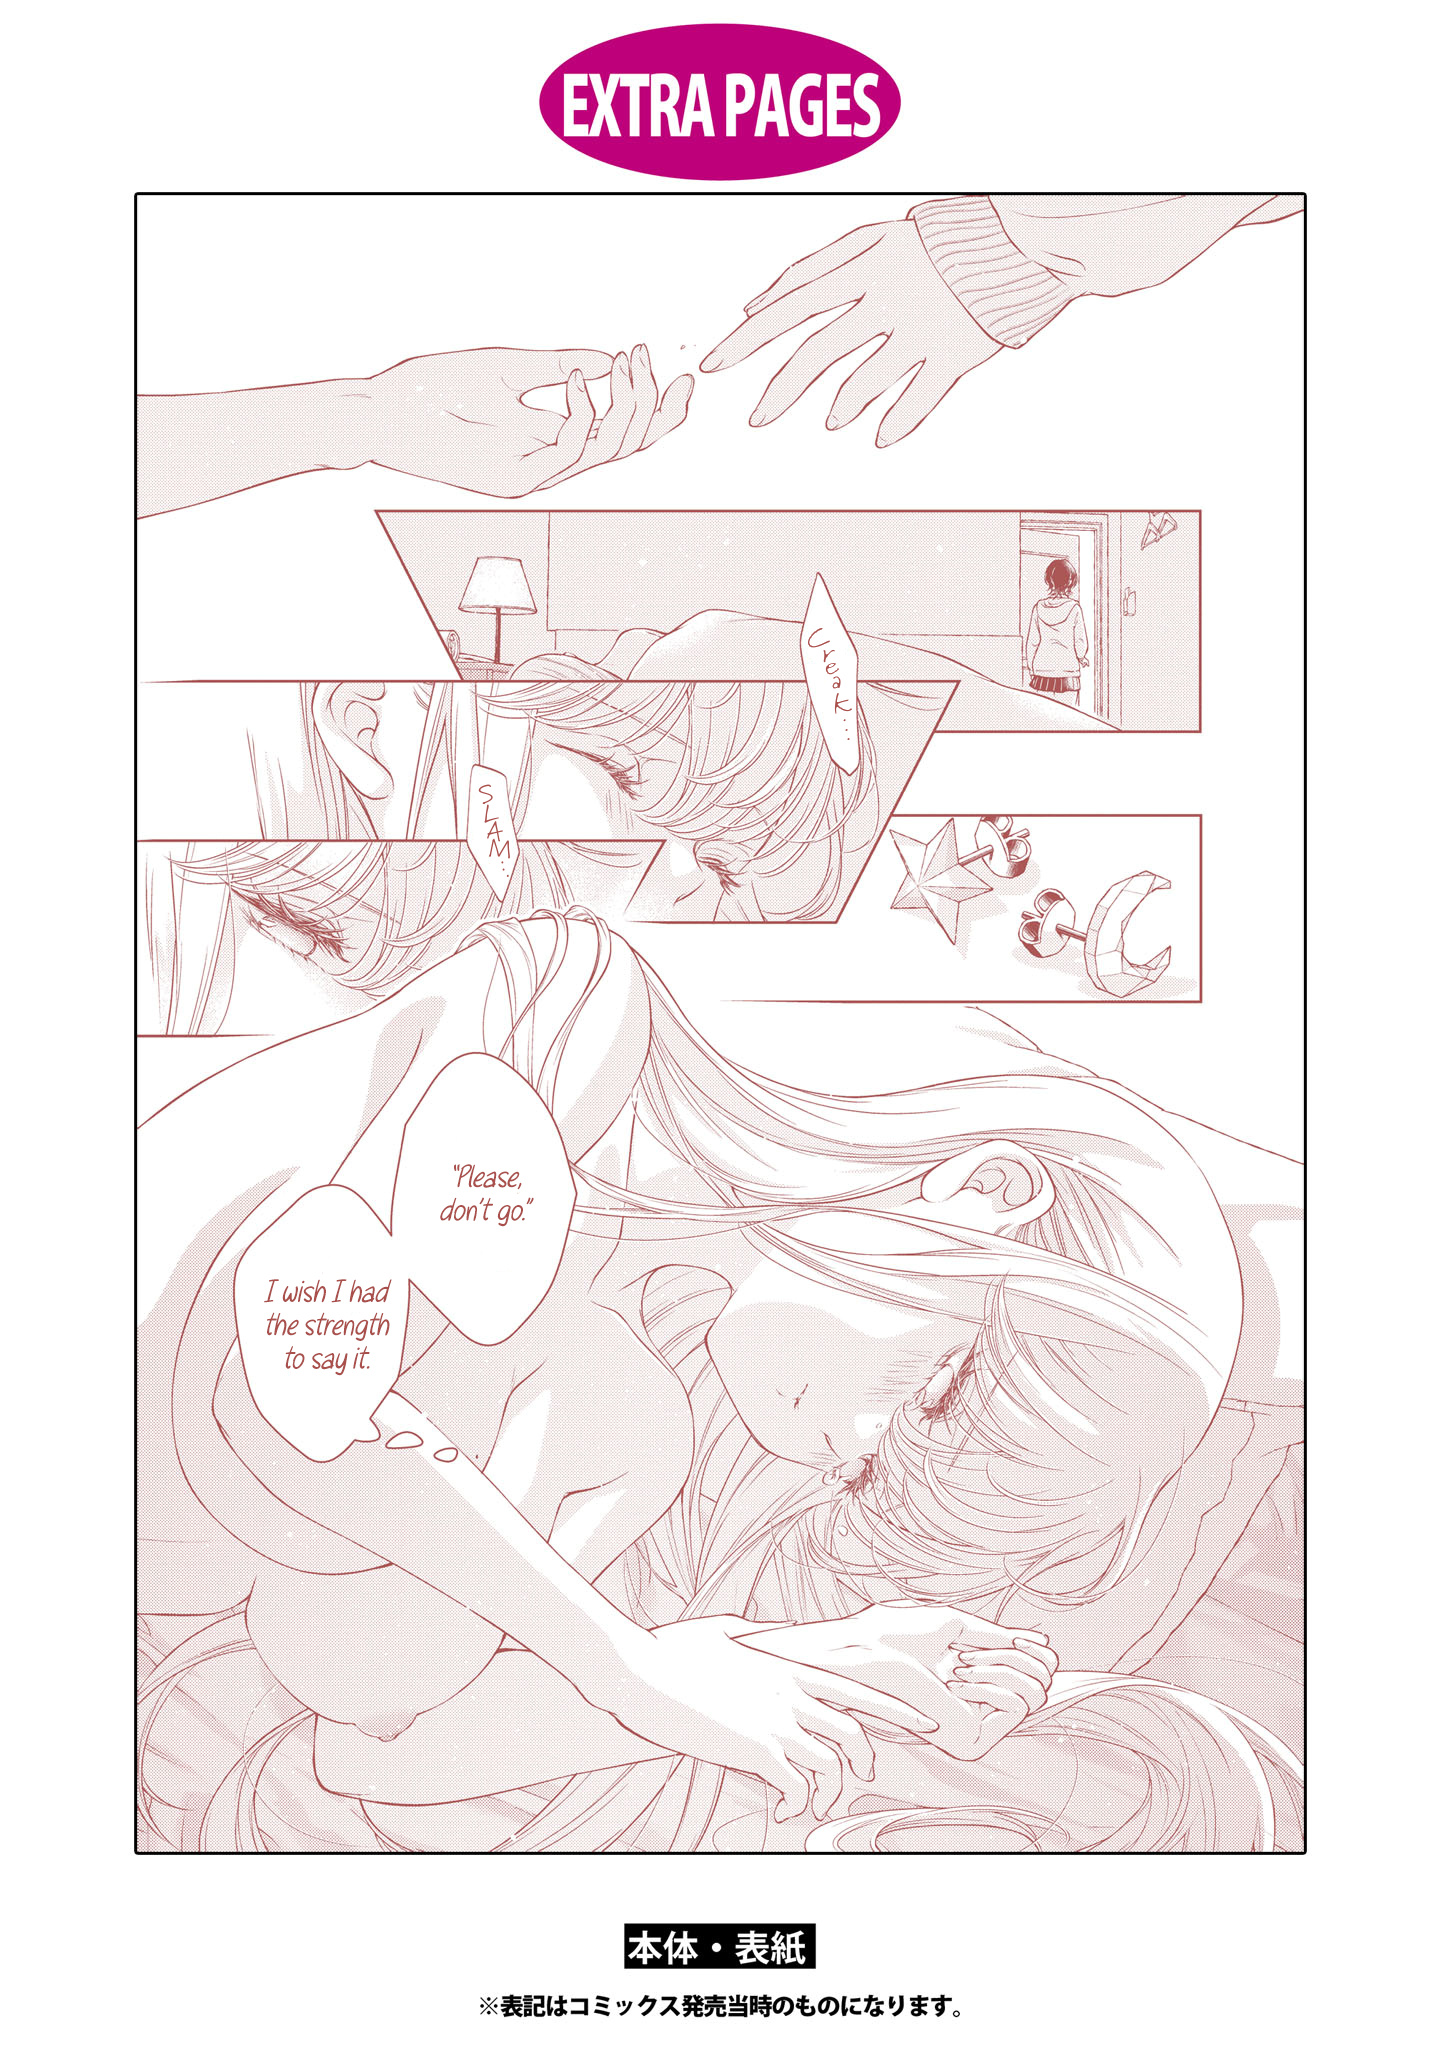 My Girlfriend’S Not Here Today Chapter 15.5: Afterword And Extra Pages Volume 3 - Picture 3